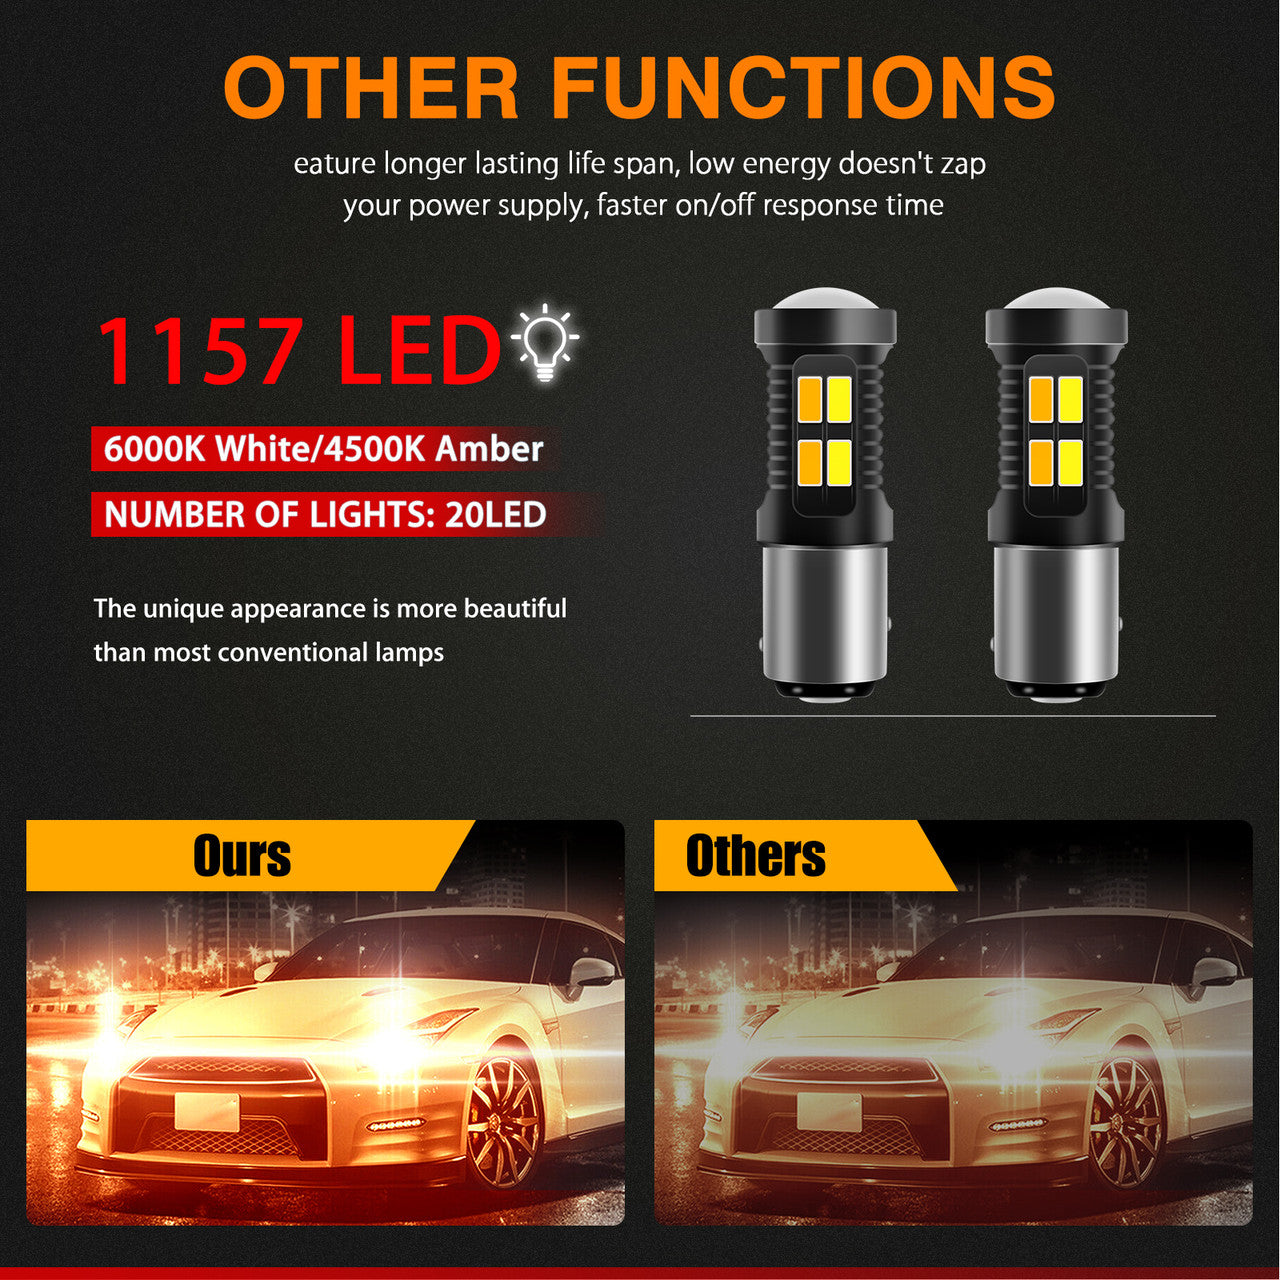 2Pcs 1157 Switchback LED Bulbs, Extremely Bright 1157 LED Light Bulbs for Turn Signal Lights Parking Lights, 1157 LED Lights 5630 Chips, White/Amber 1157 Turn Signal Parking Bulbs for 12V Vehicles